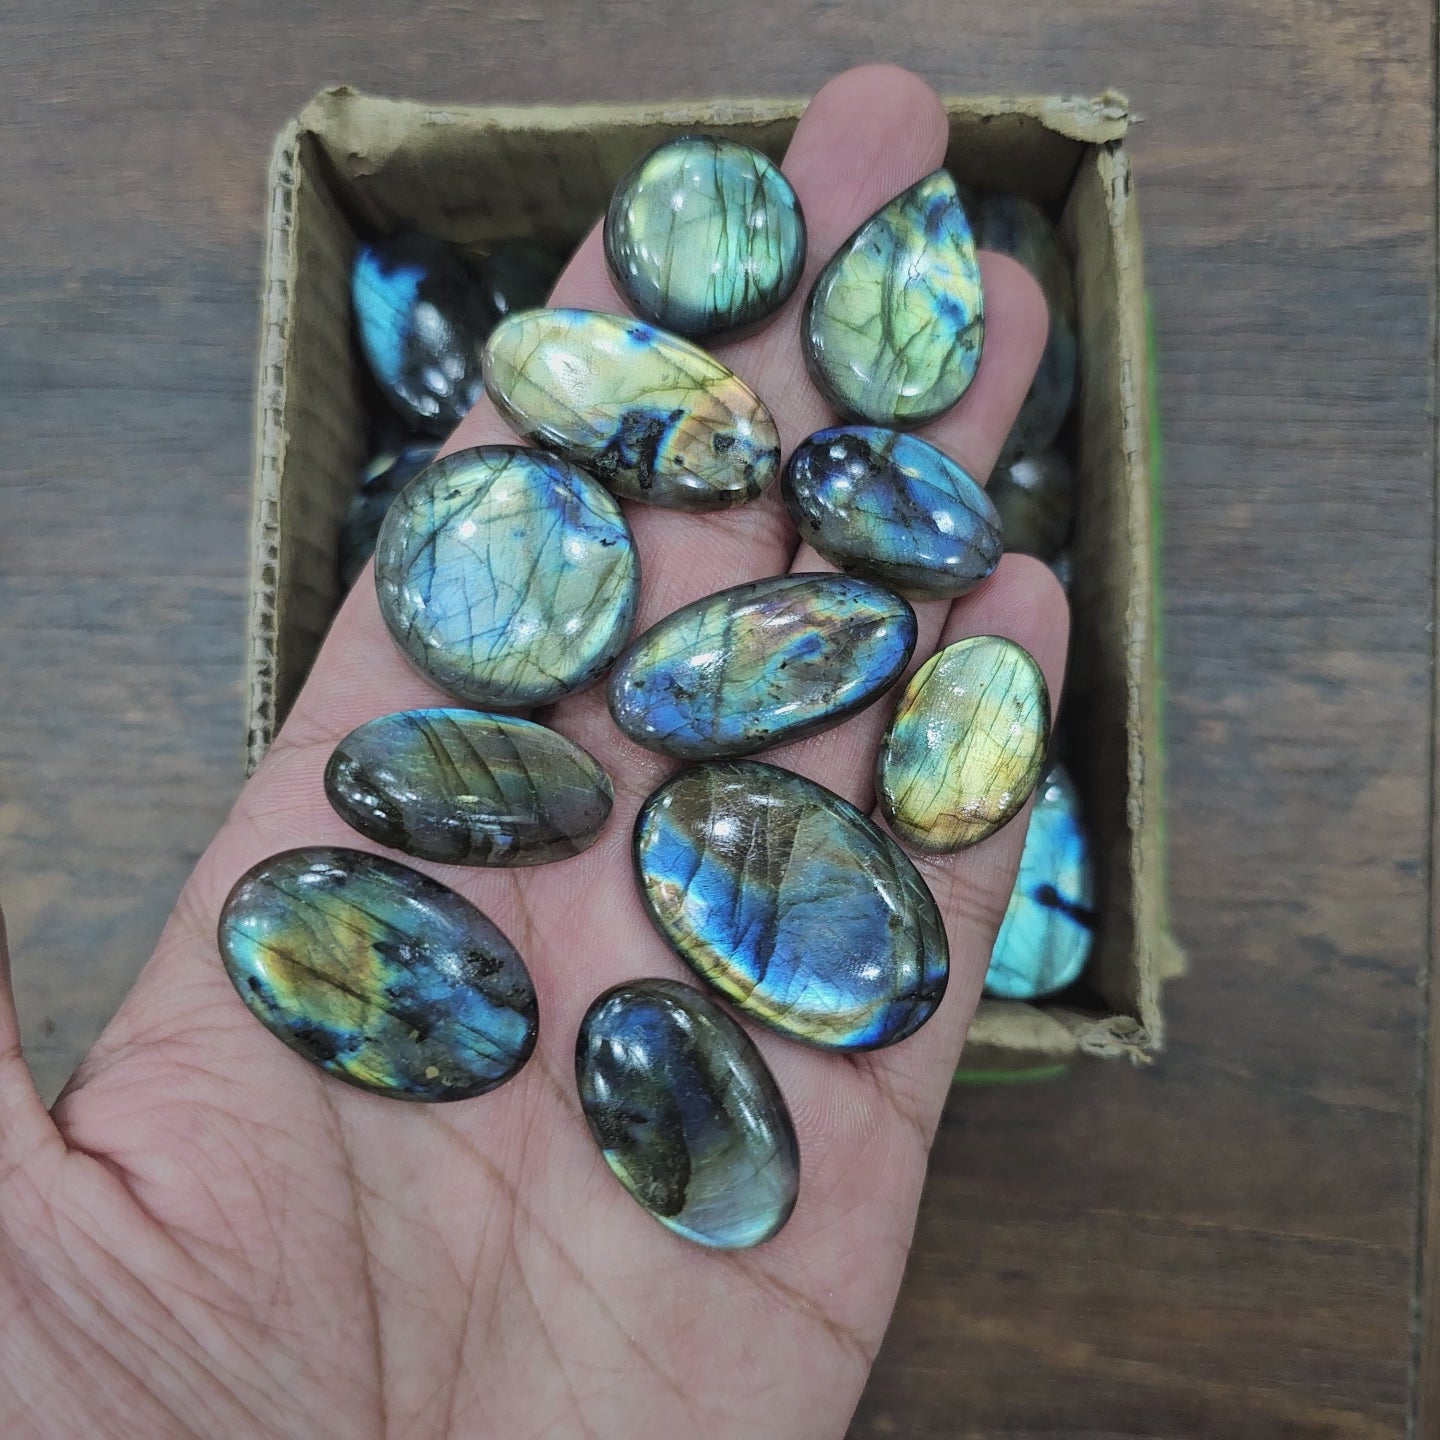 100 Pcs of Multi Fire Labradorite Cabochon | 20mm to 30mm | Flash in all Pieces